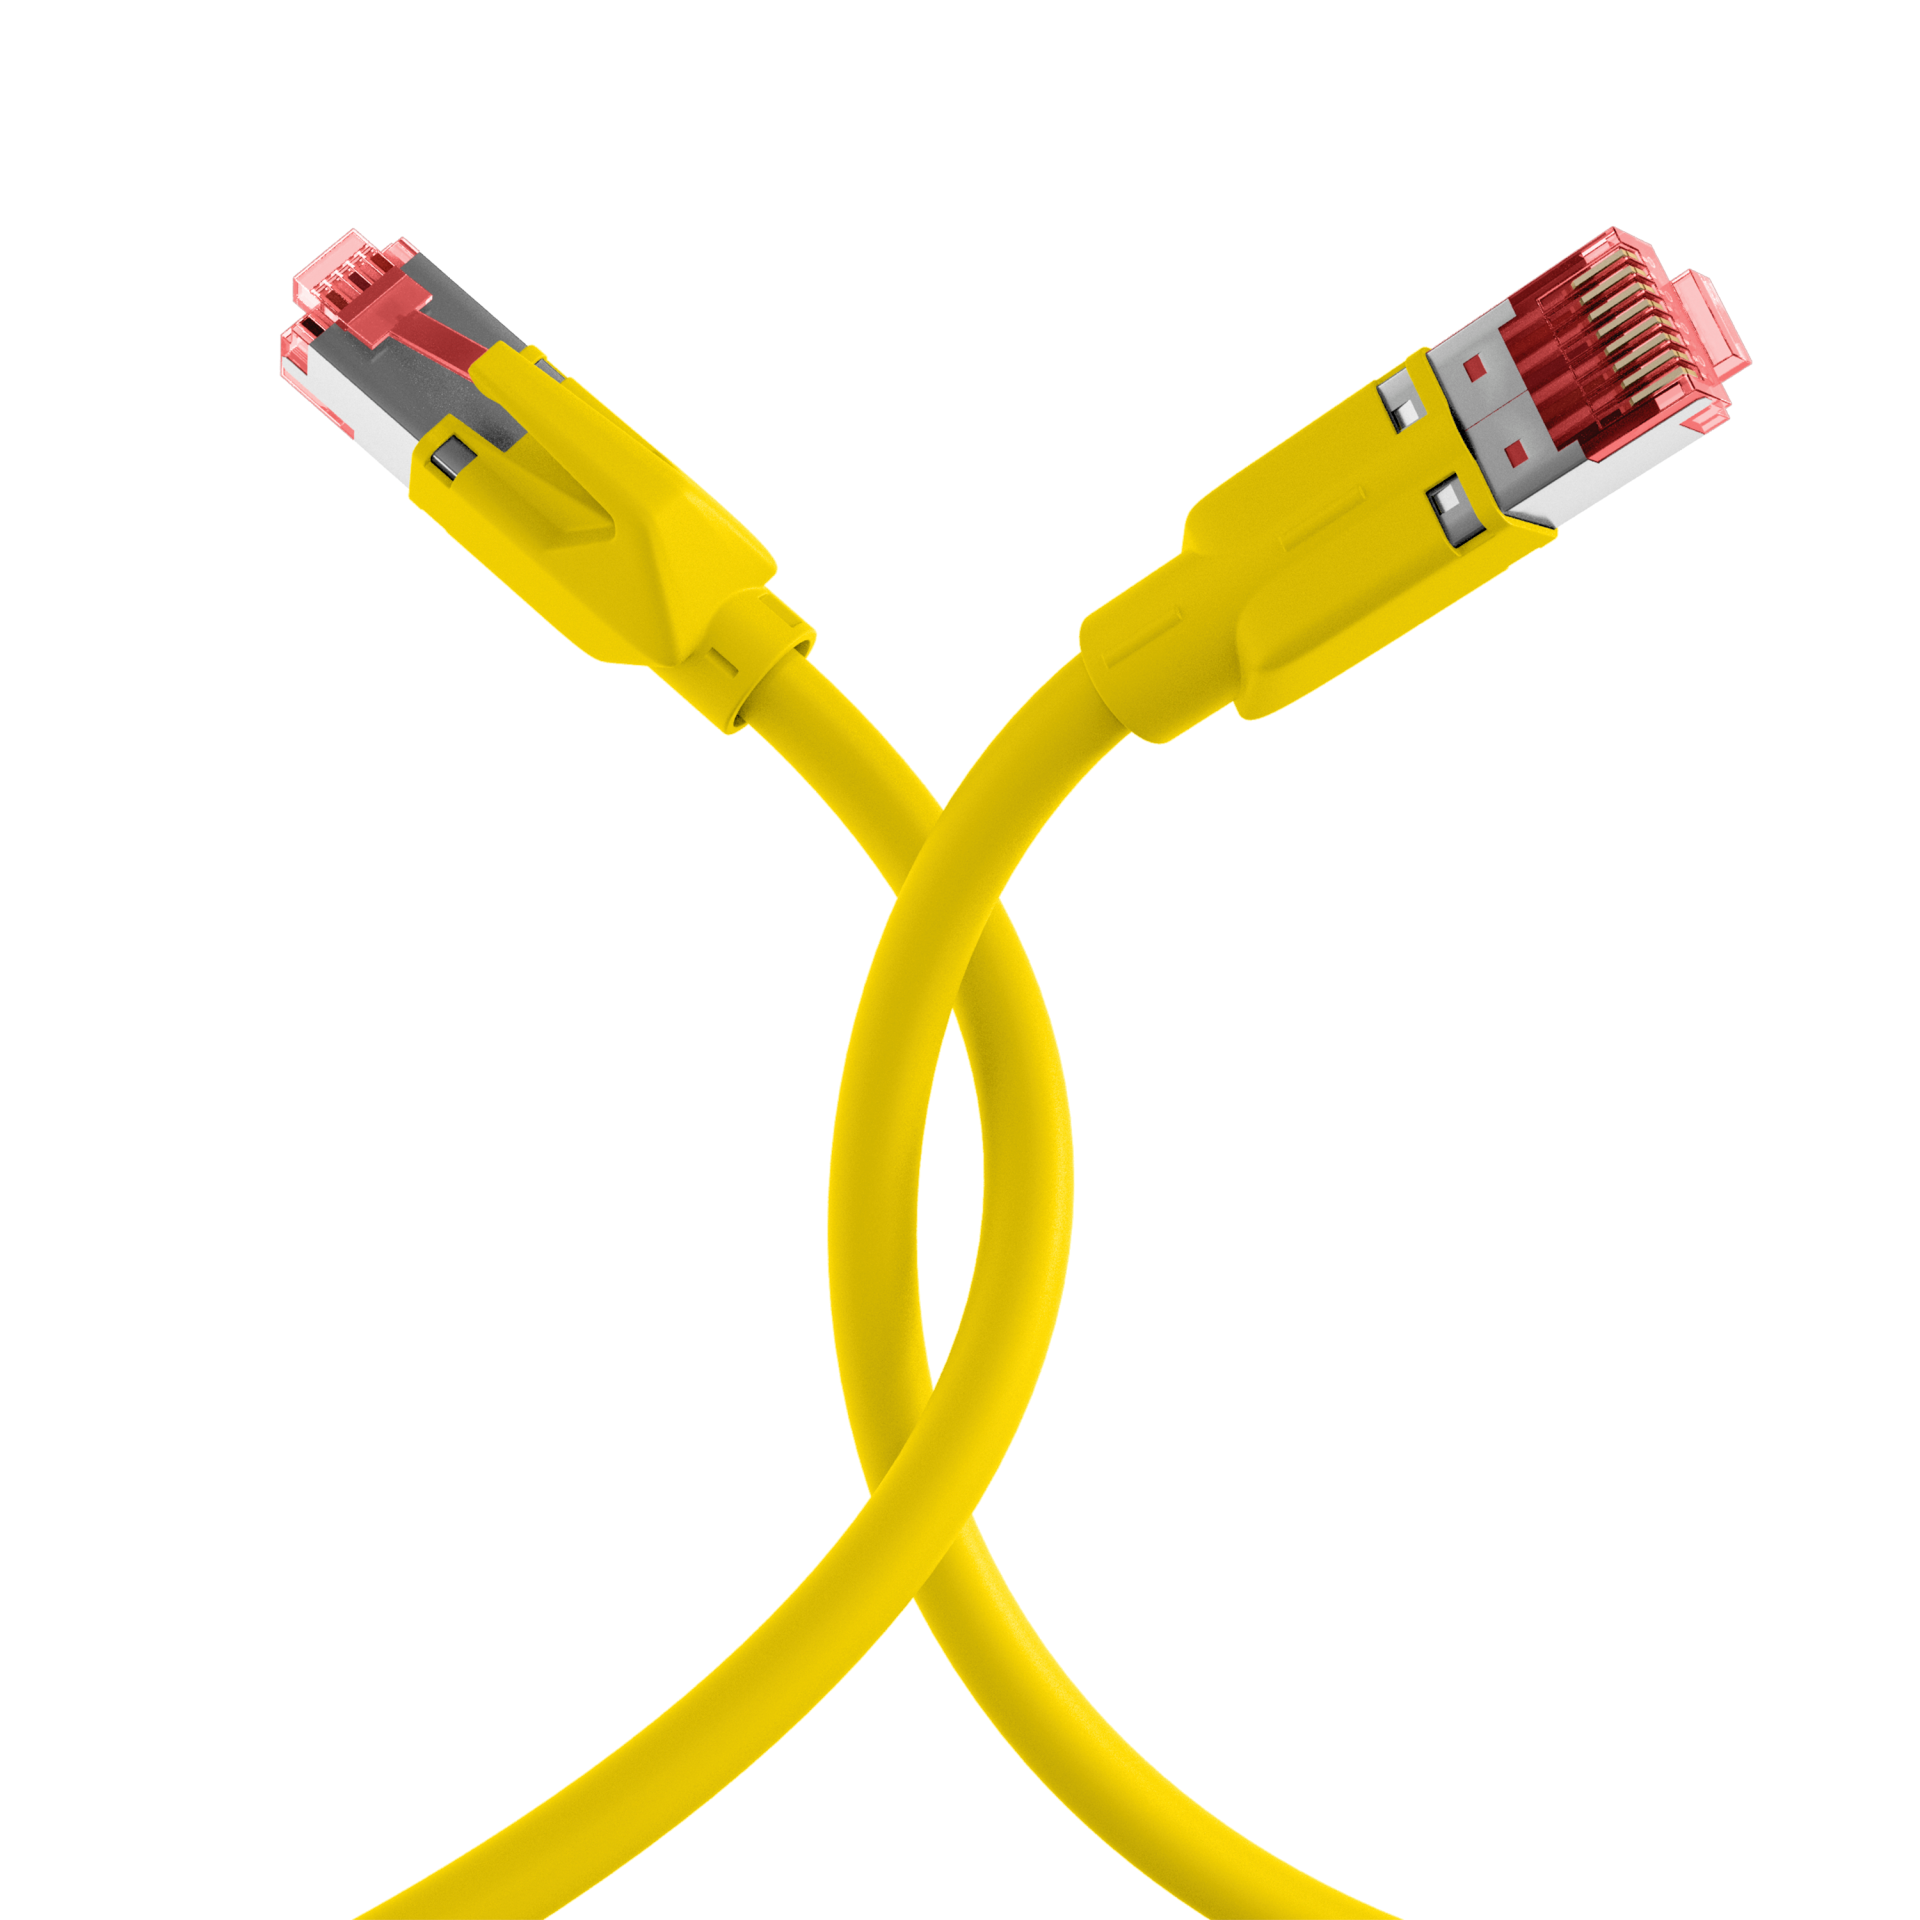 RJ45 Patch Cord Cat.5e S/UTP PUR TM21 for drag chains yellow 10m